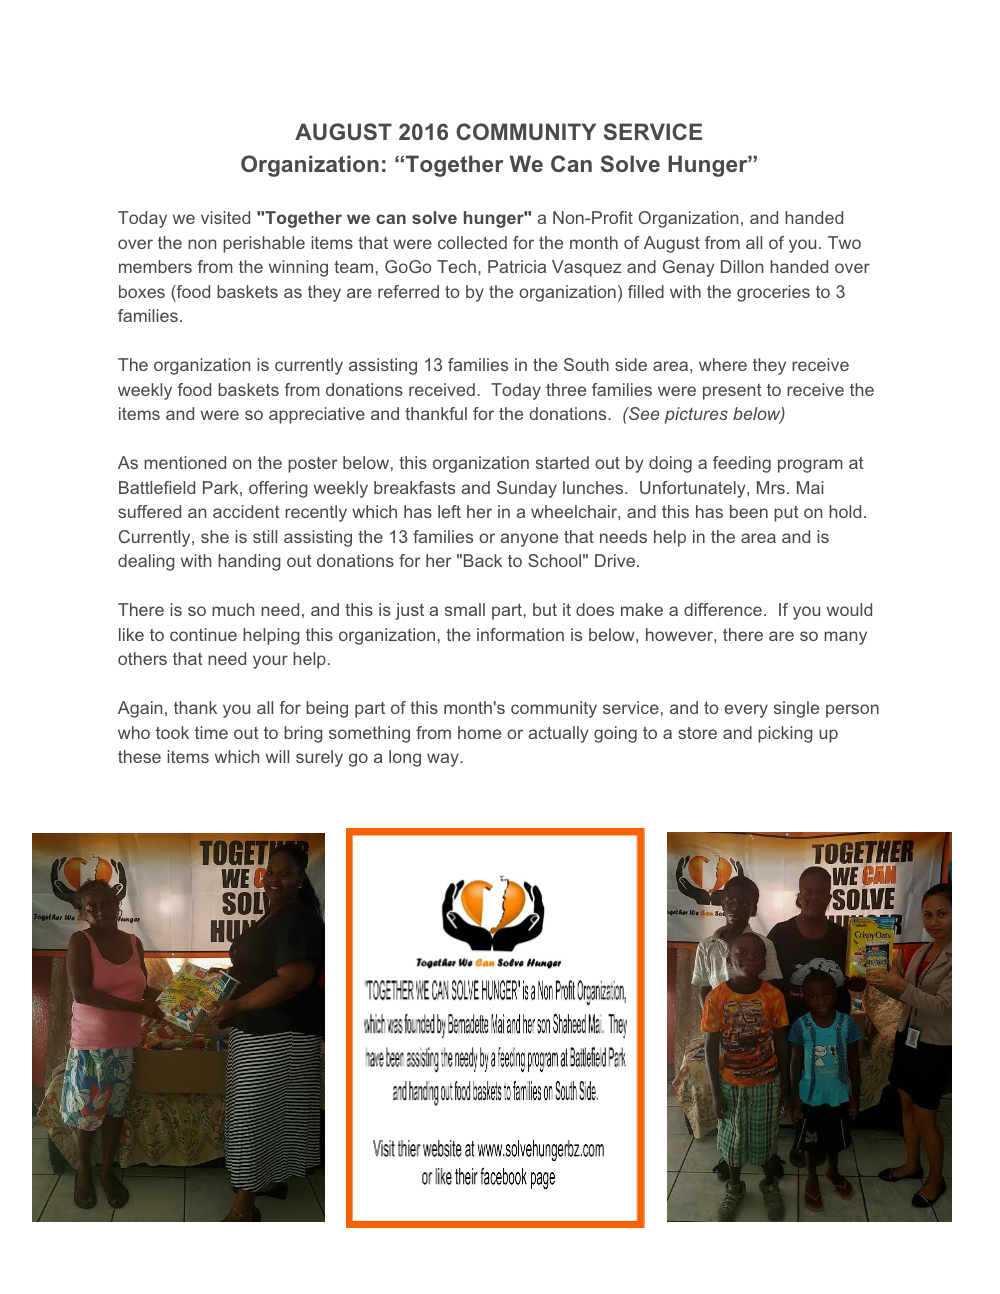 Protel BPO gives back to community by partnering with nonprofit "Together We Can Solve Hunger"